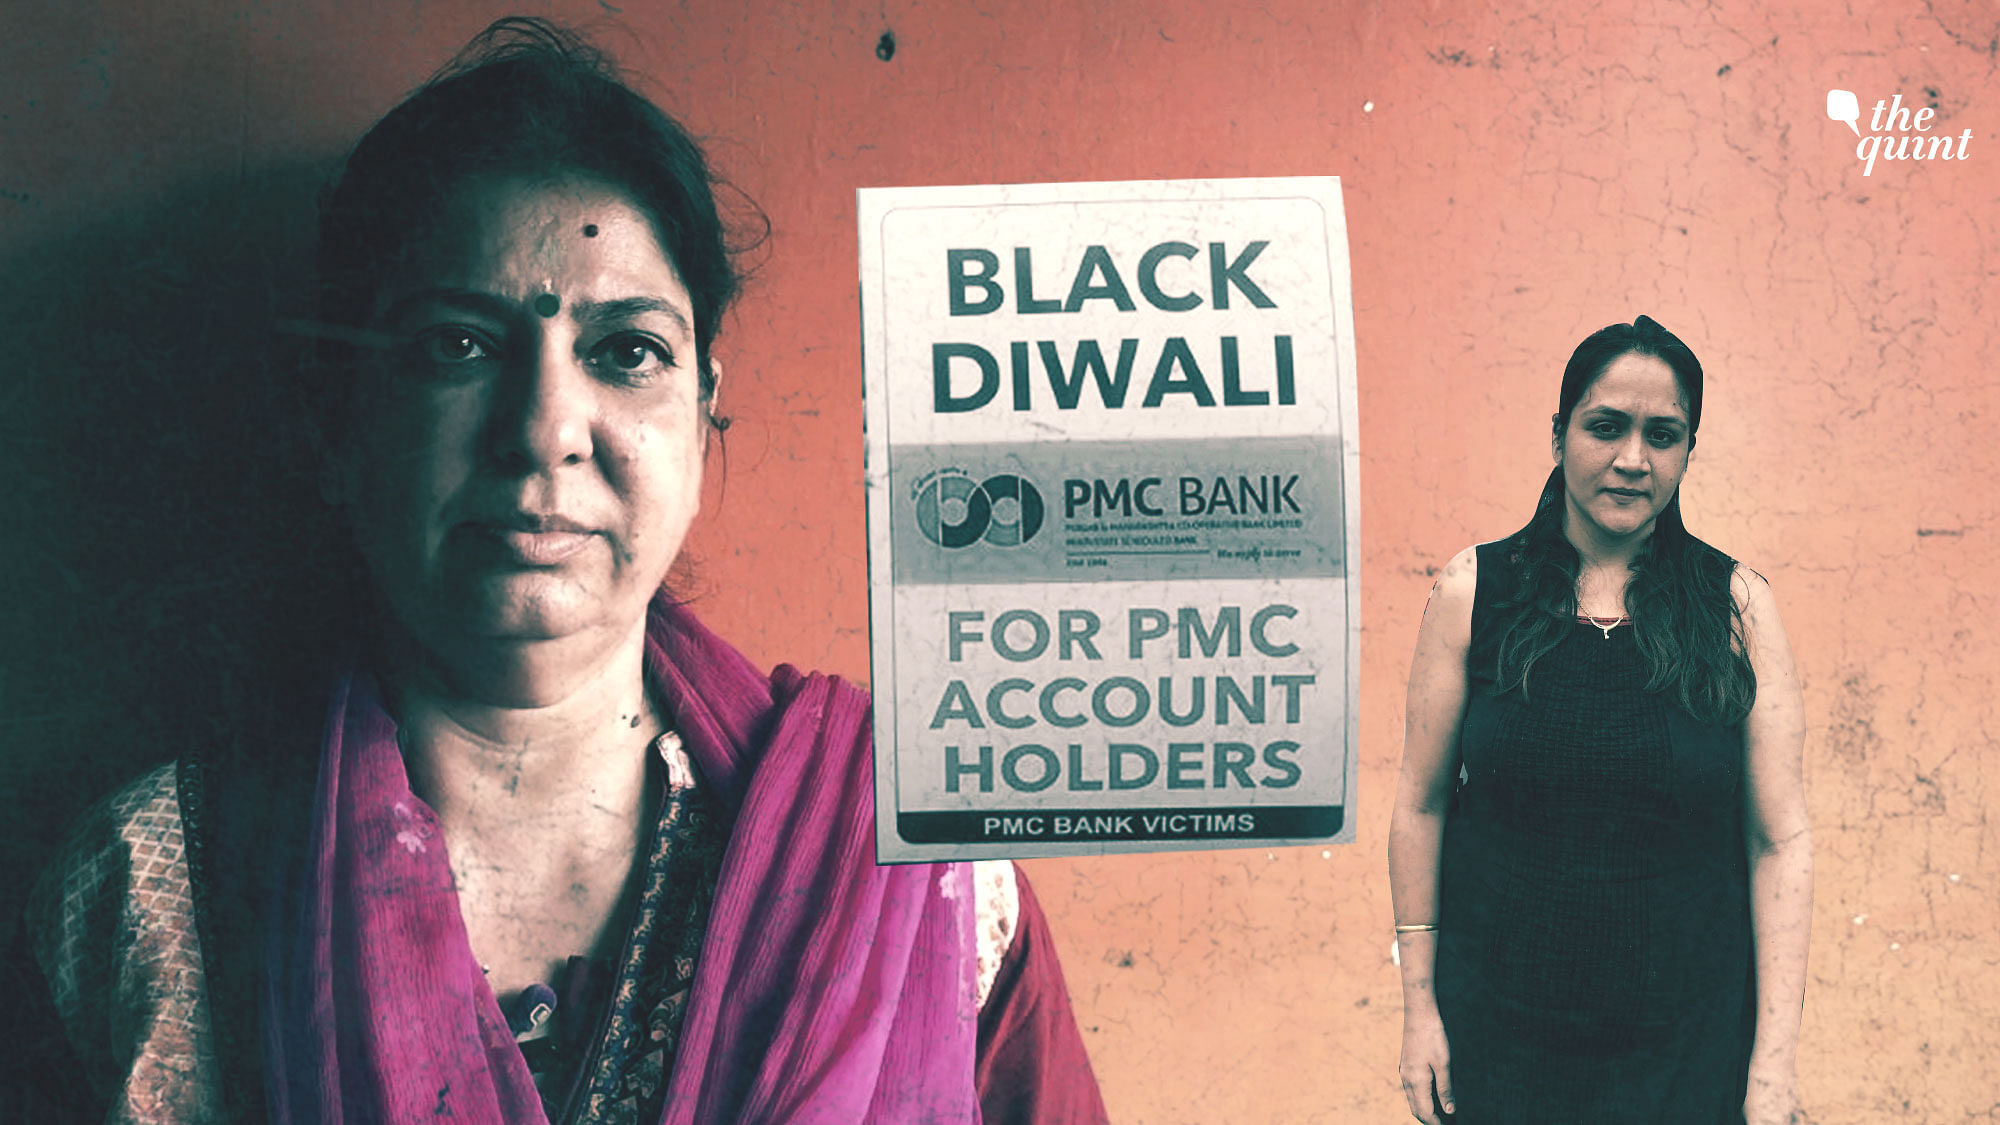 Pooja Gurbani (left) and Barkha Rajpal (Right) are two among the thousands of PMC Bank account holders who are affected this Diwali.